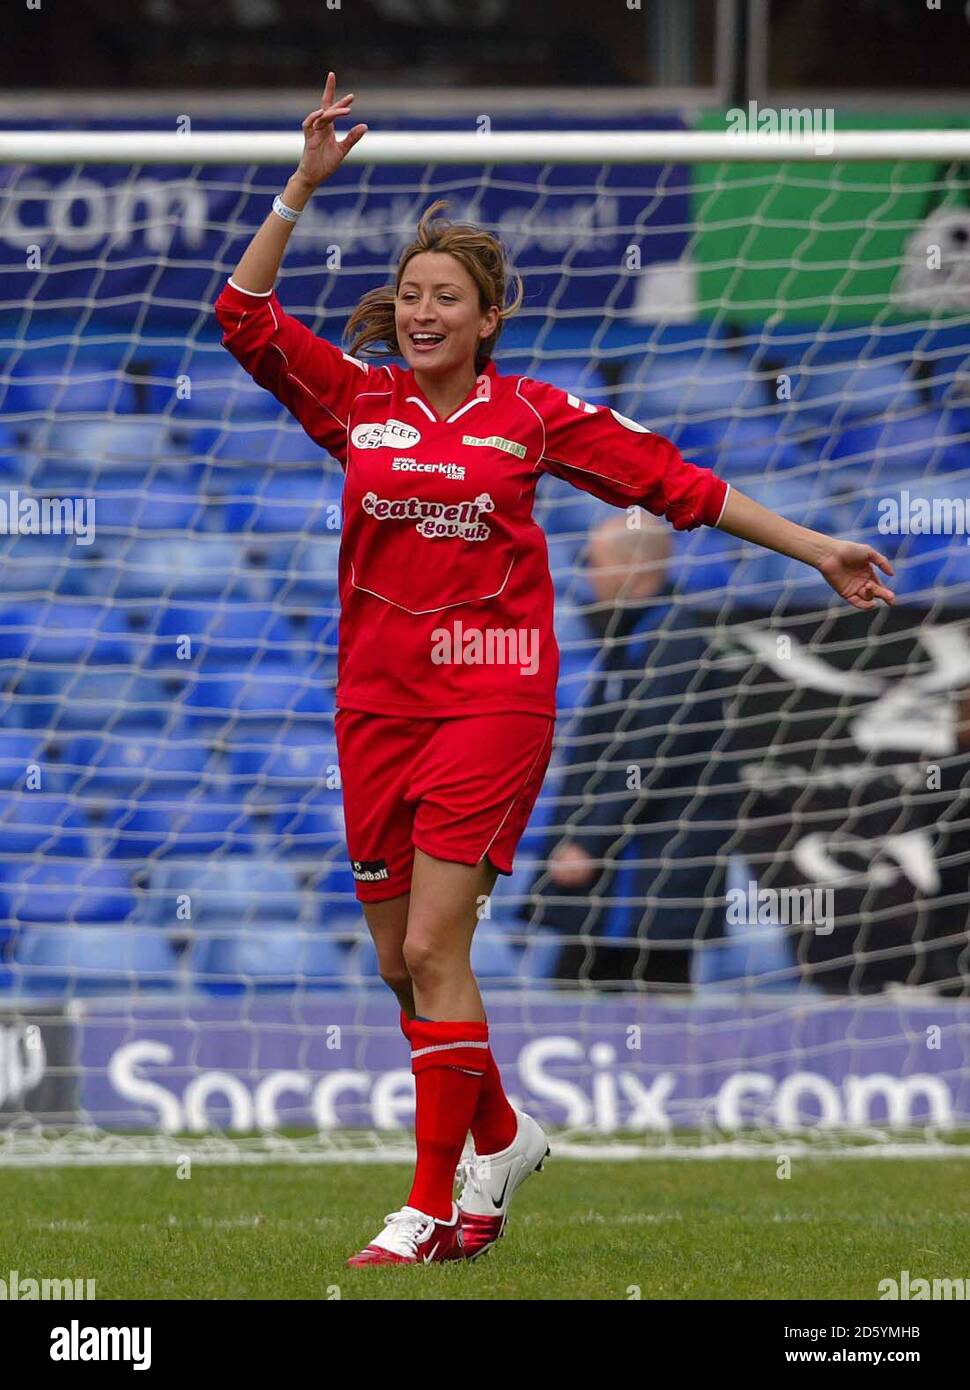 Rebecca Loos during the Soccer Six Finals at Birmingham City's St Andrews Football Stadium Stock Photo